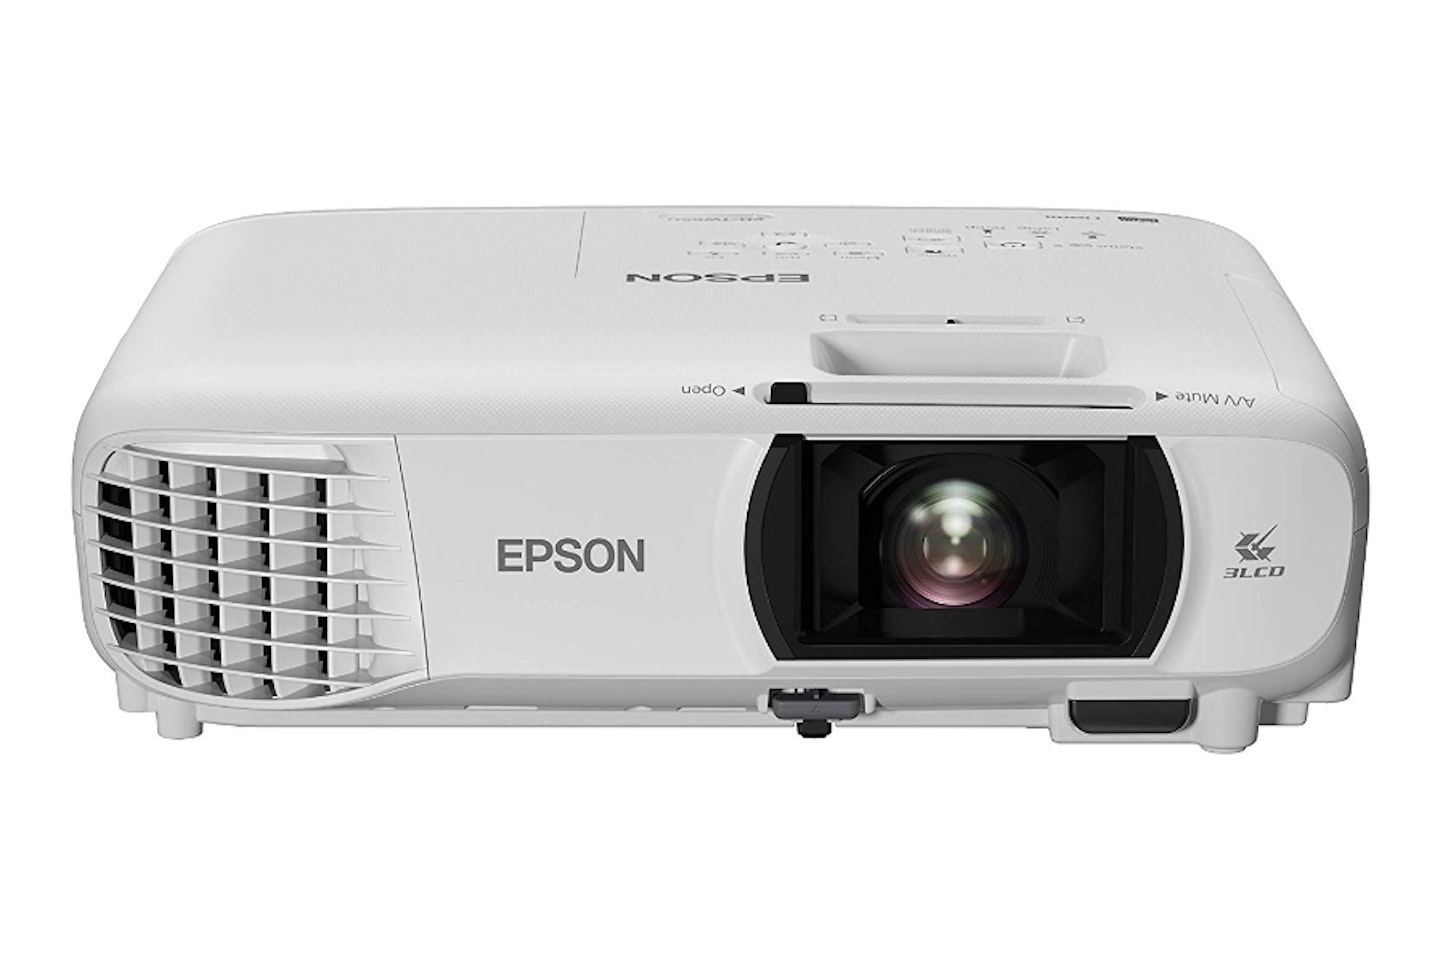 Best for Work: Epson EH-TW650 3LCD Full HD